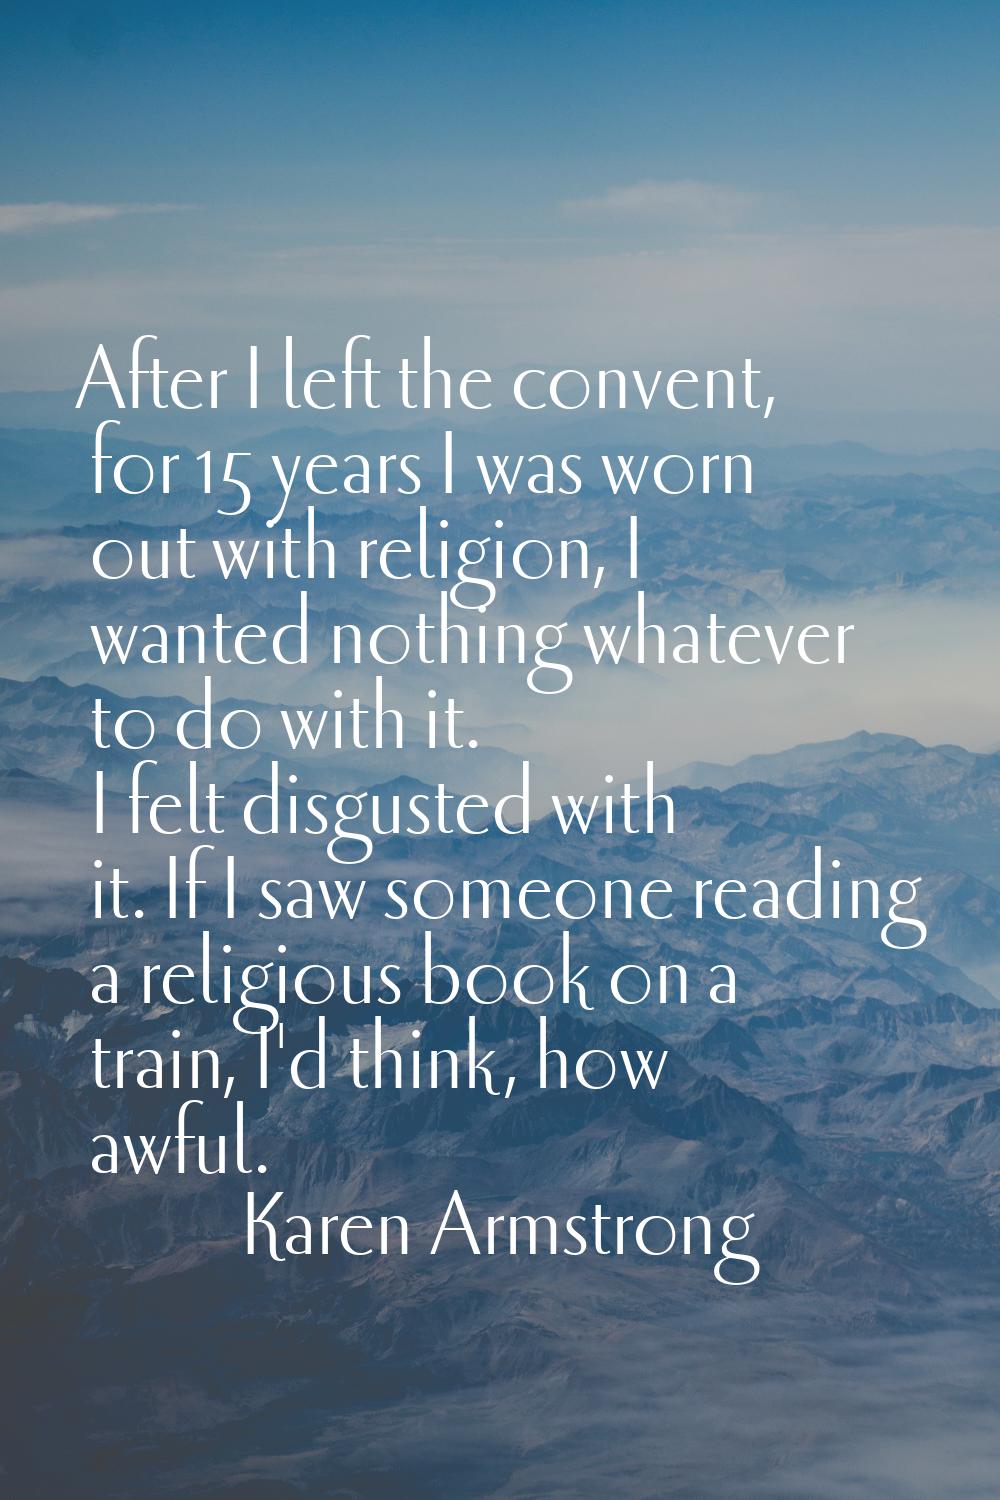 After I left the convent, for 15 years I was worn out with religion, I wanted nothing whatever to d